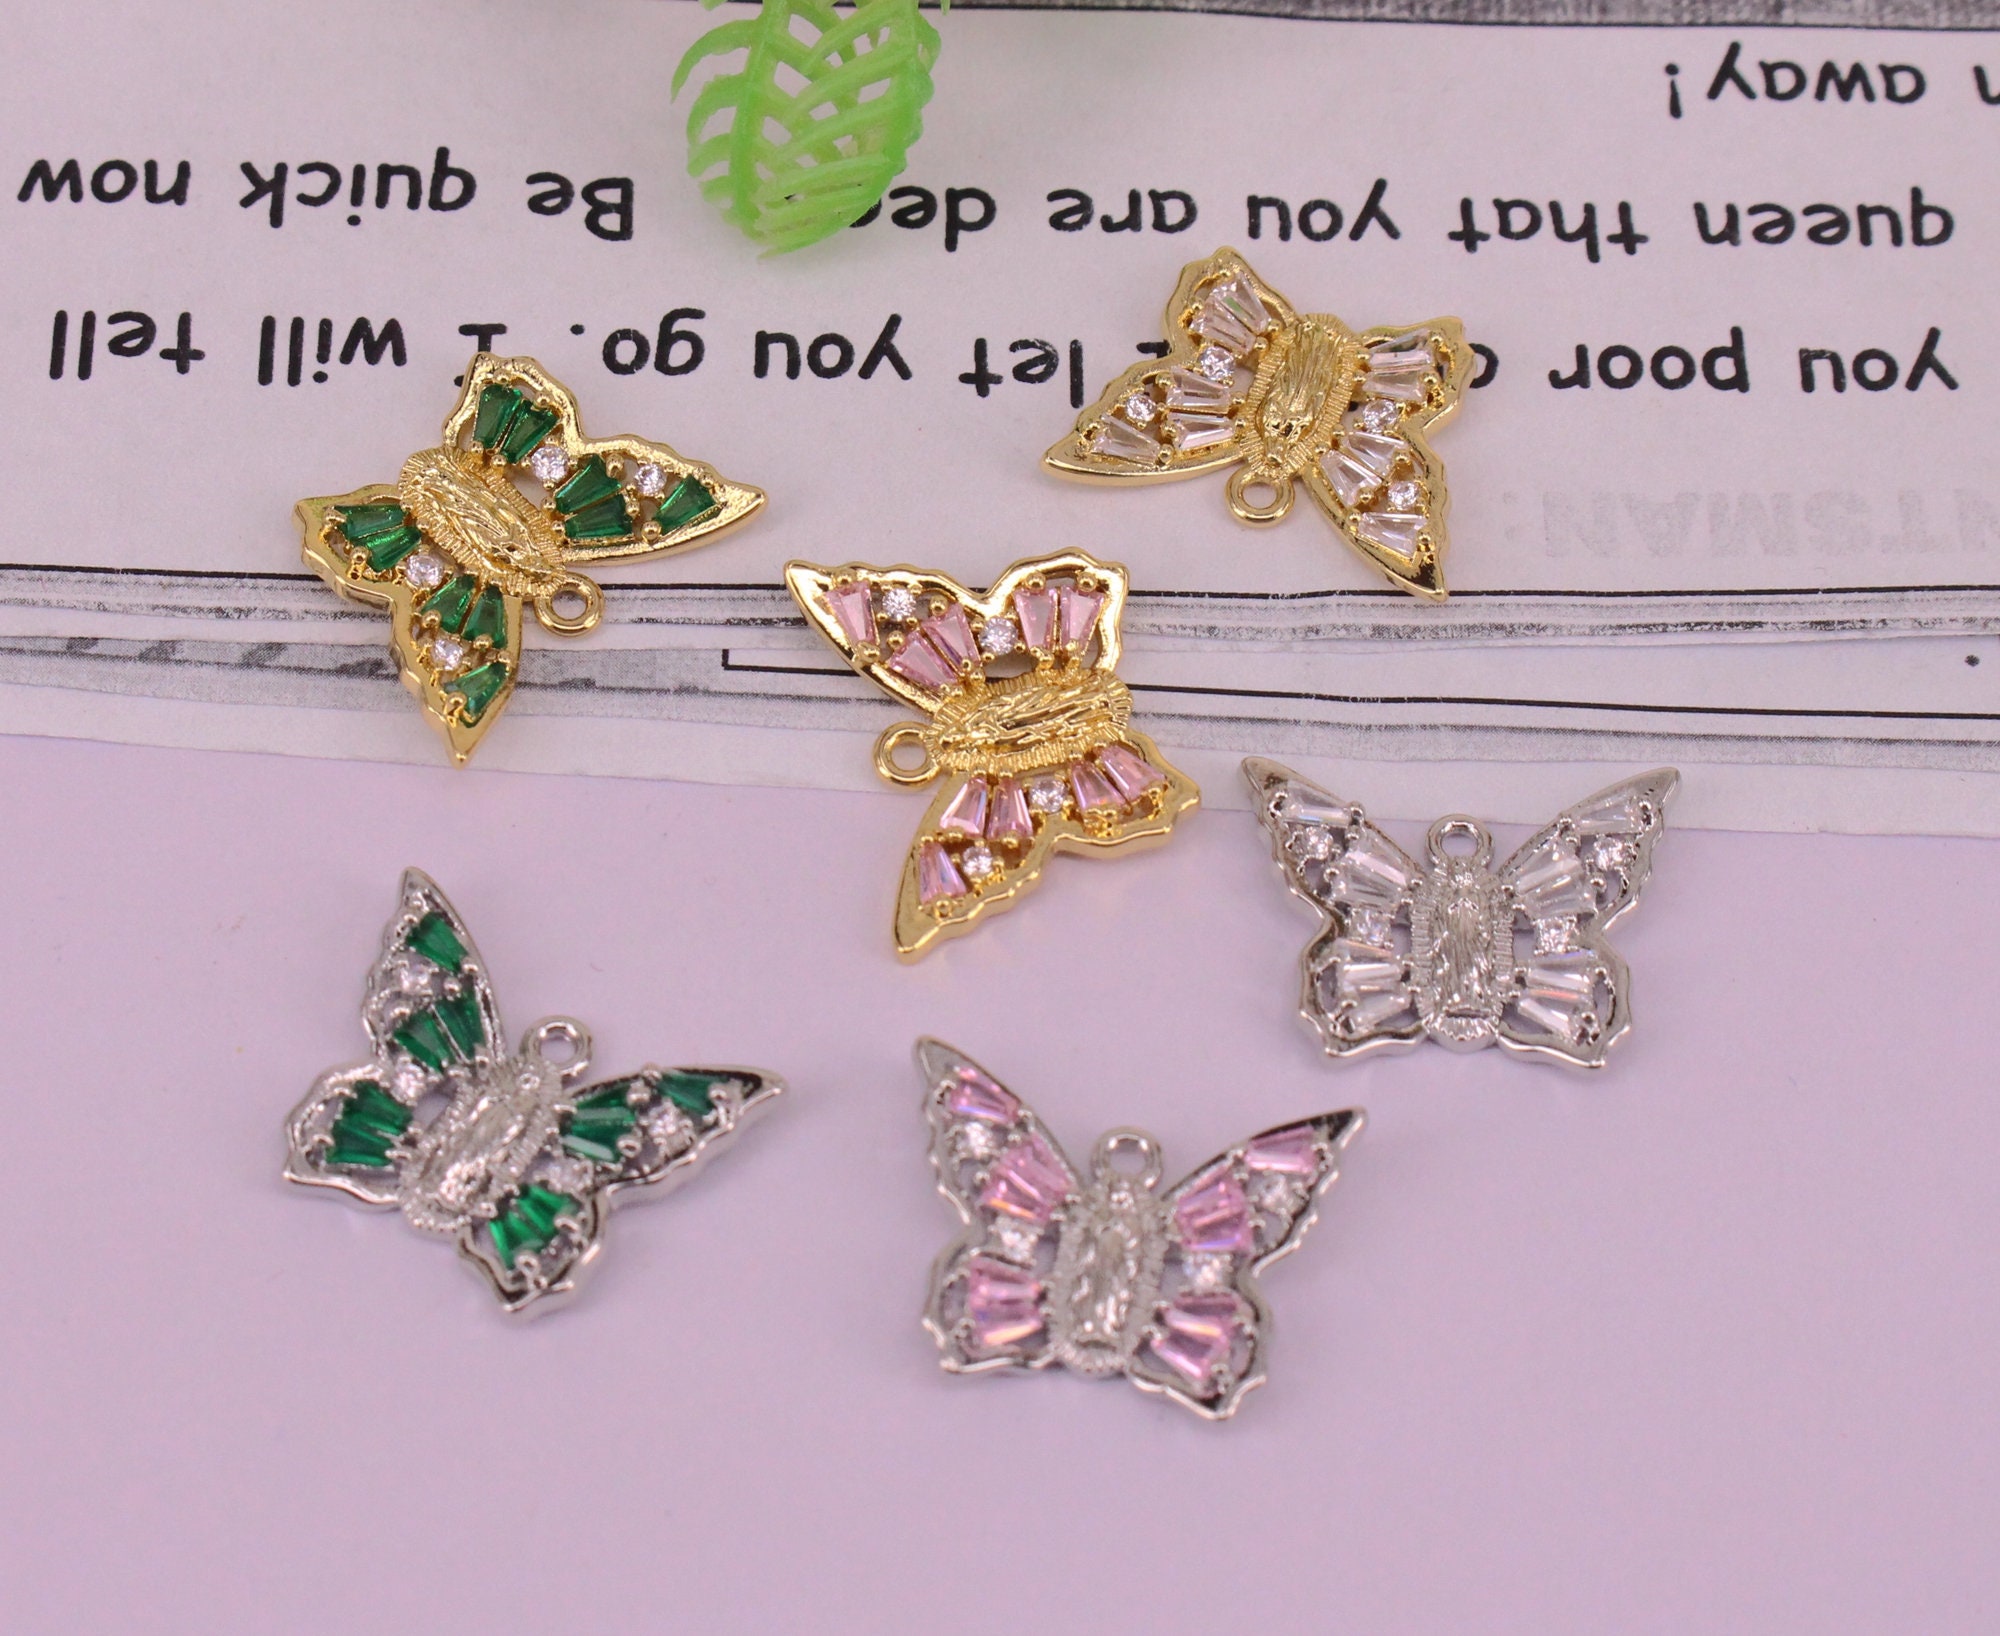 EXCEART 10pcs Butterfly Pendant Mexican Charms for Bracelets San Judas  Charms Jewelry Making Accessories Metal Trim Charm Necklace Keychain for  Crafts